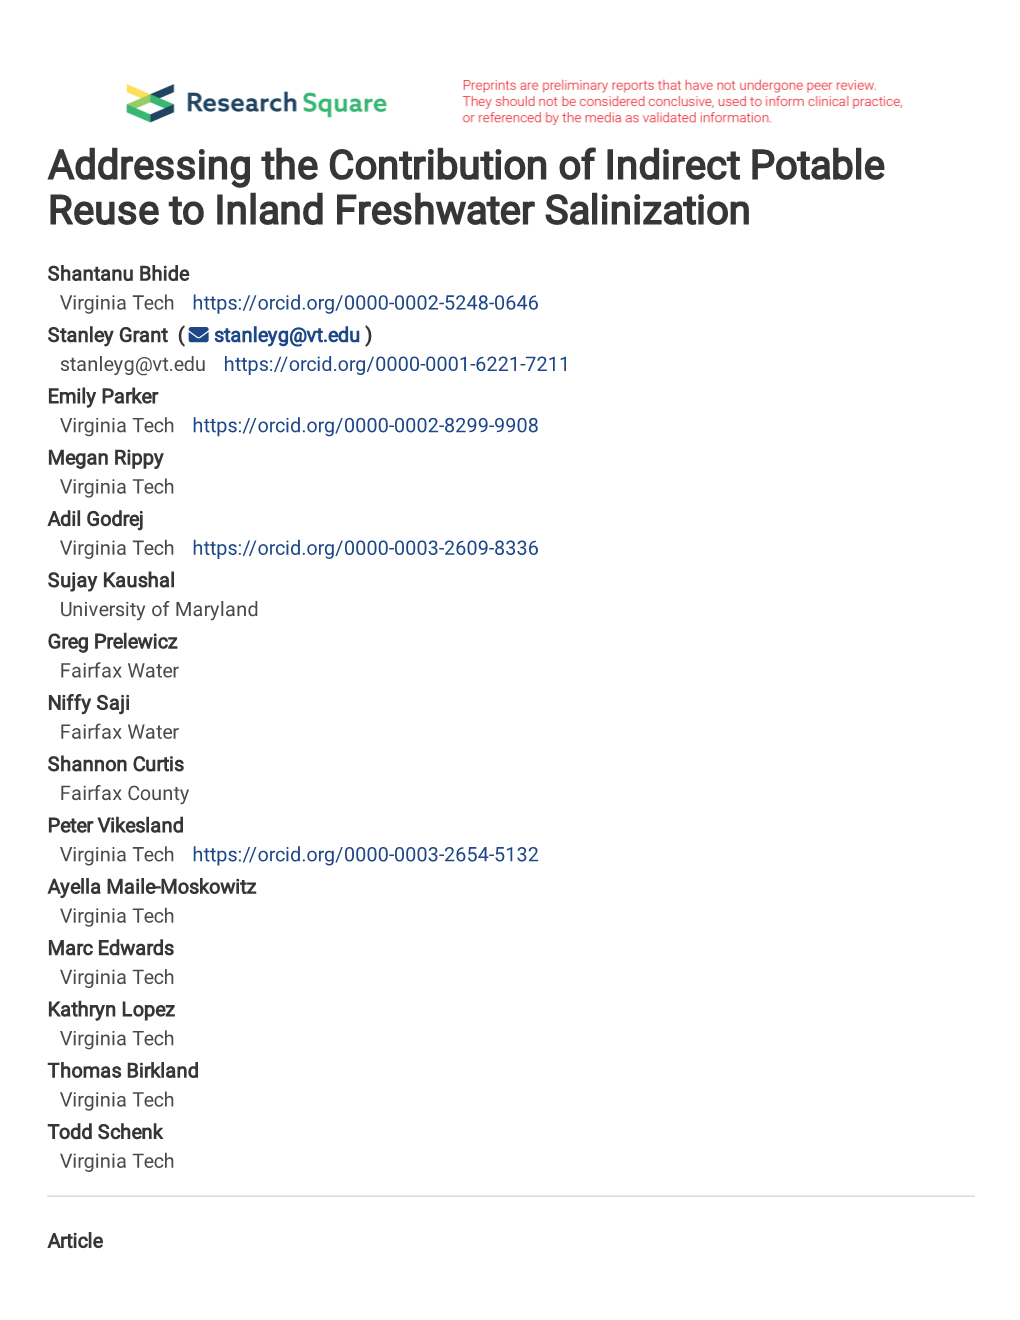 Addressing the Contribution of Indirect Potable Reuse to Inland Freshwater Salinization